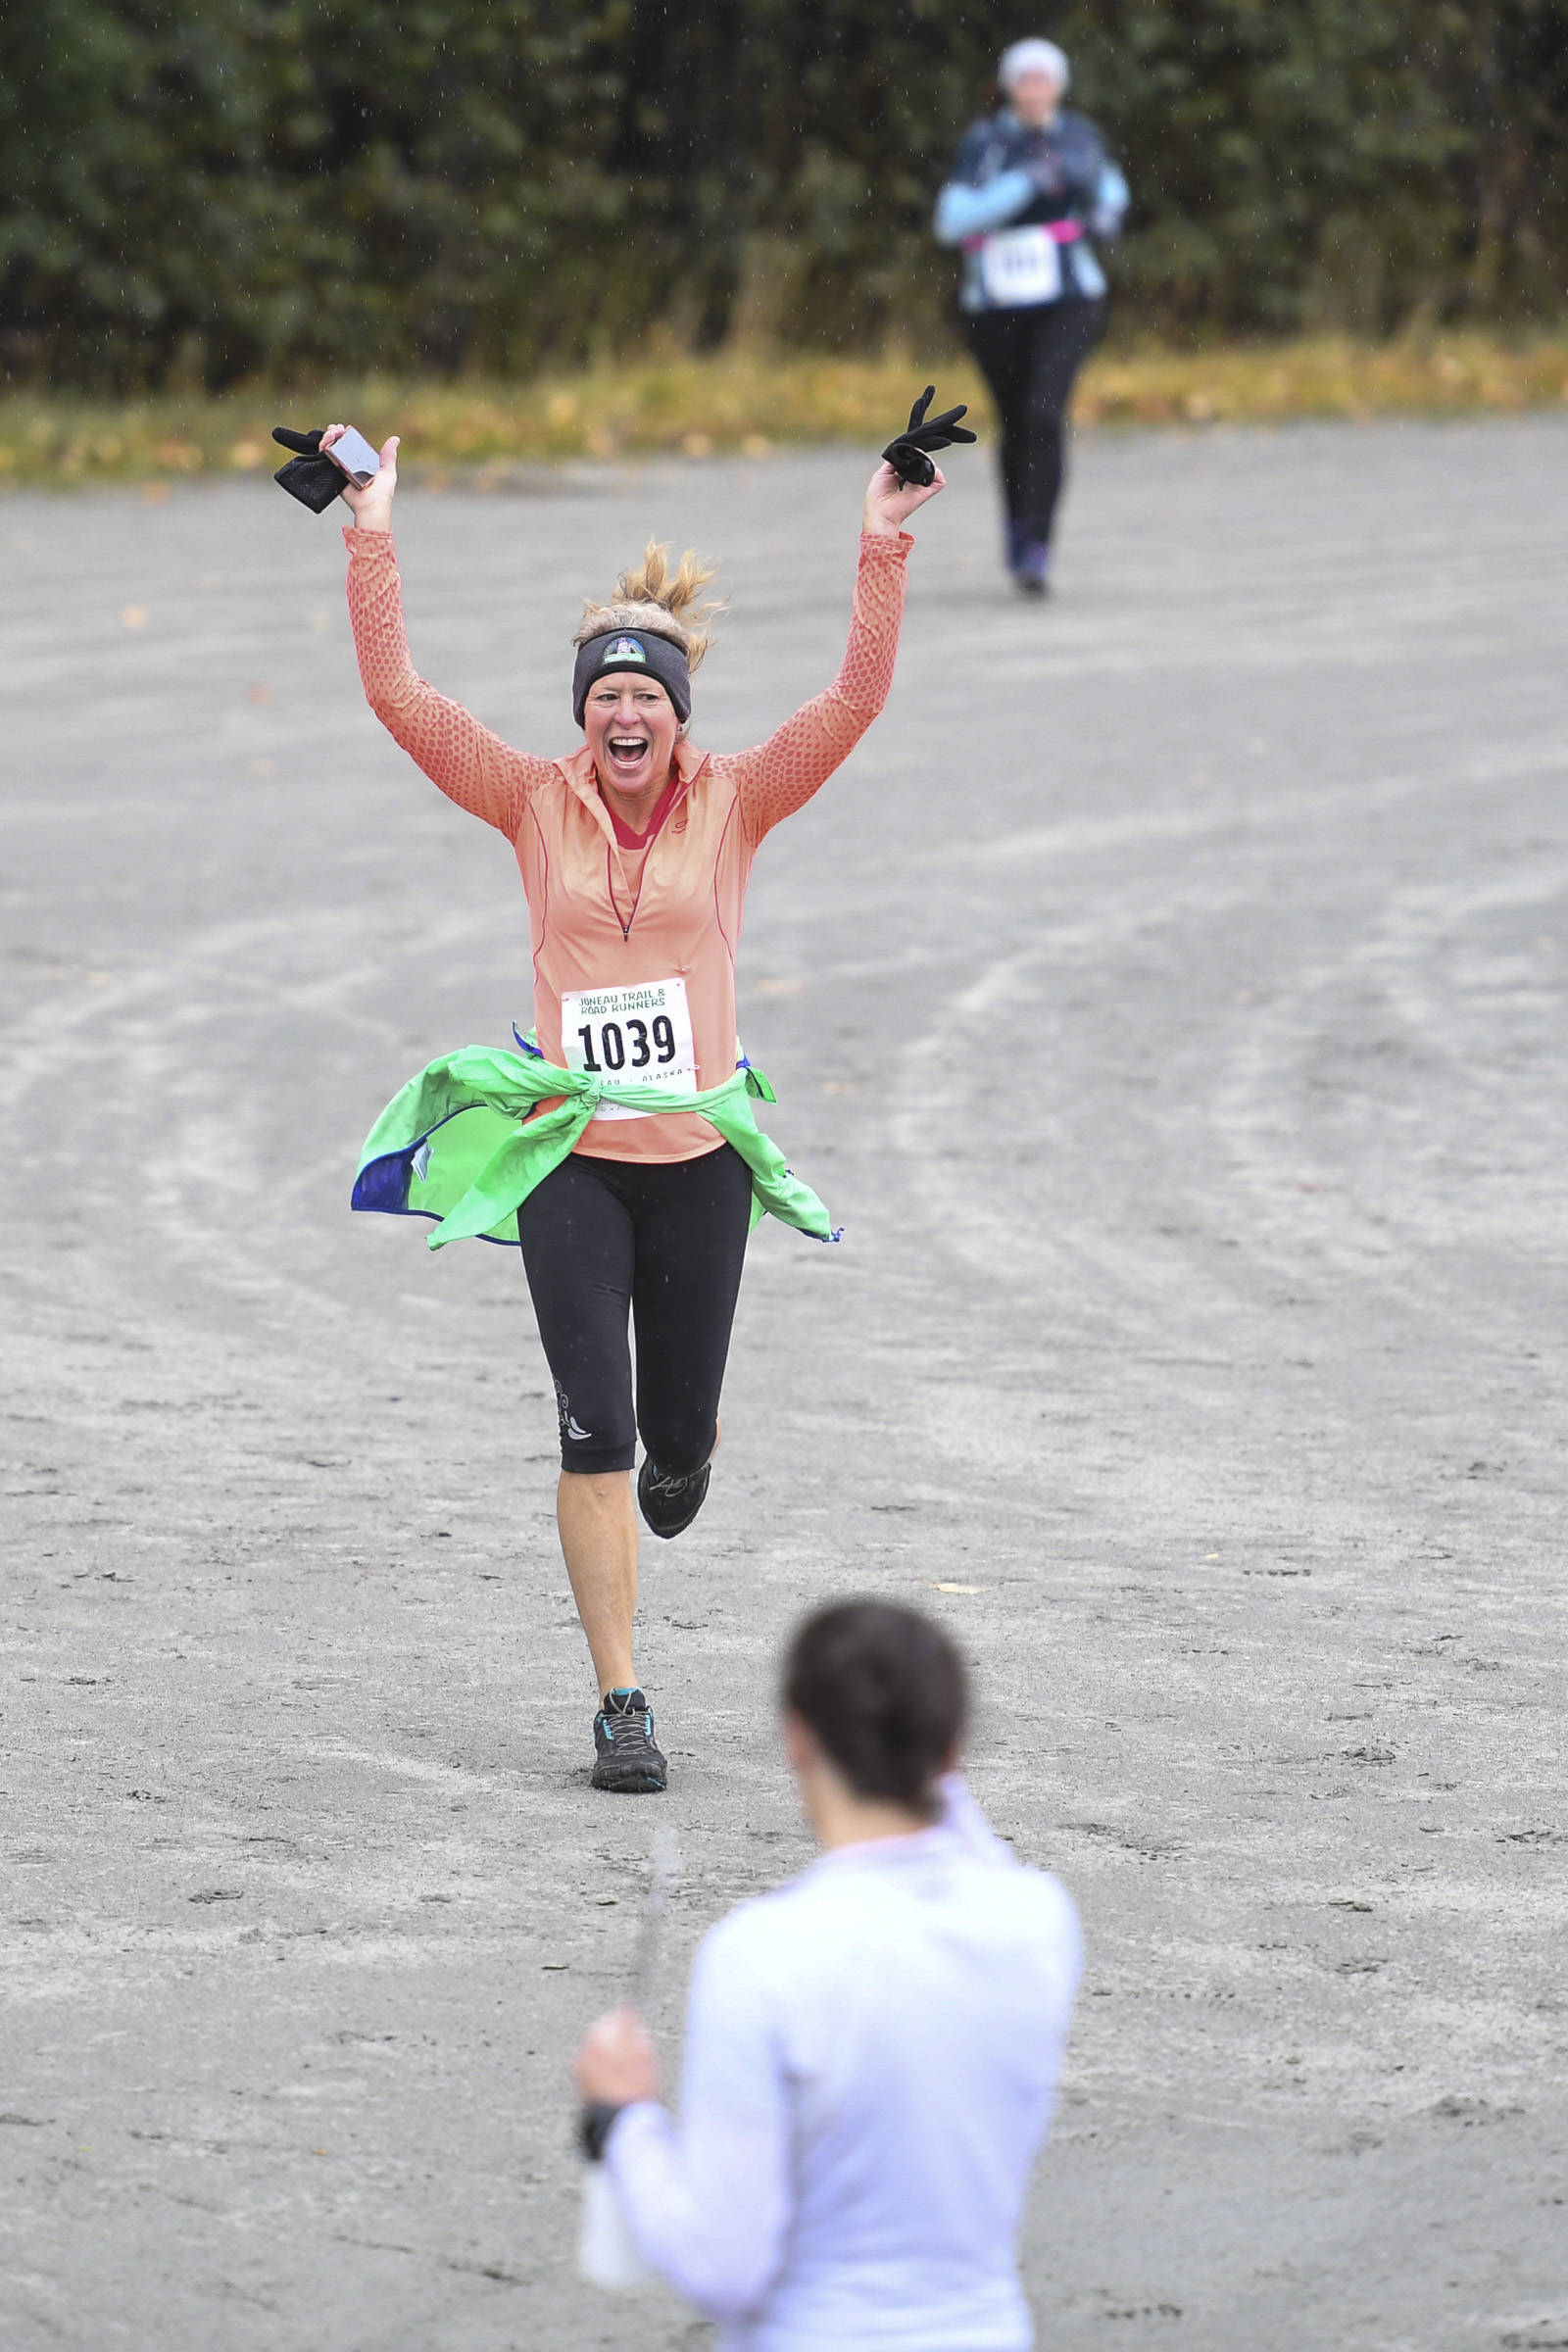 Colleen Jones celebrates her finish at the annual community mental health run, the Extra Tough 5K & 1 Mile Run, on Saturday, Oct. 12, 2019, at Riverbend Elementary School. The run is sponsored by National Alliance on Mental Illness (NAMI) Juneau. Jones finished in 21st place out of 39 runners. (Michael Penn | Juneau Empire)